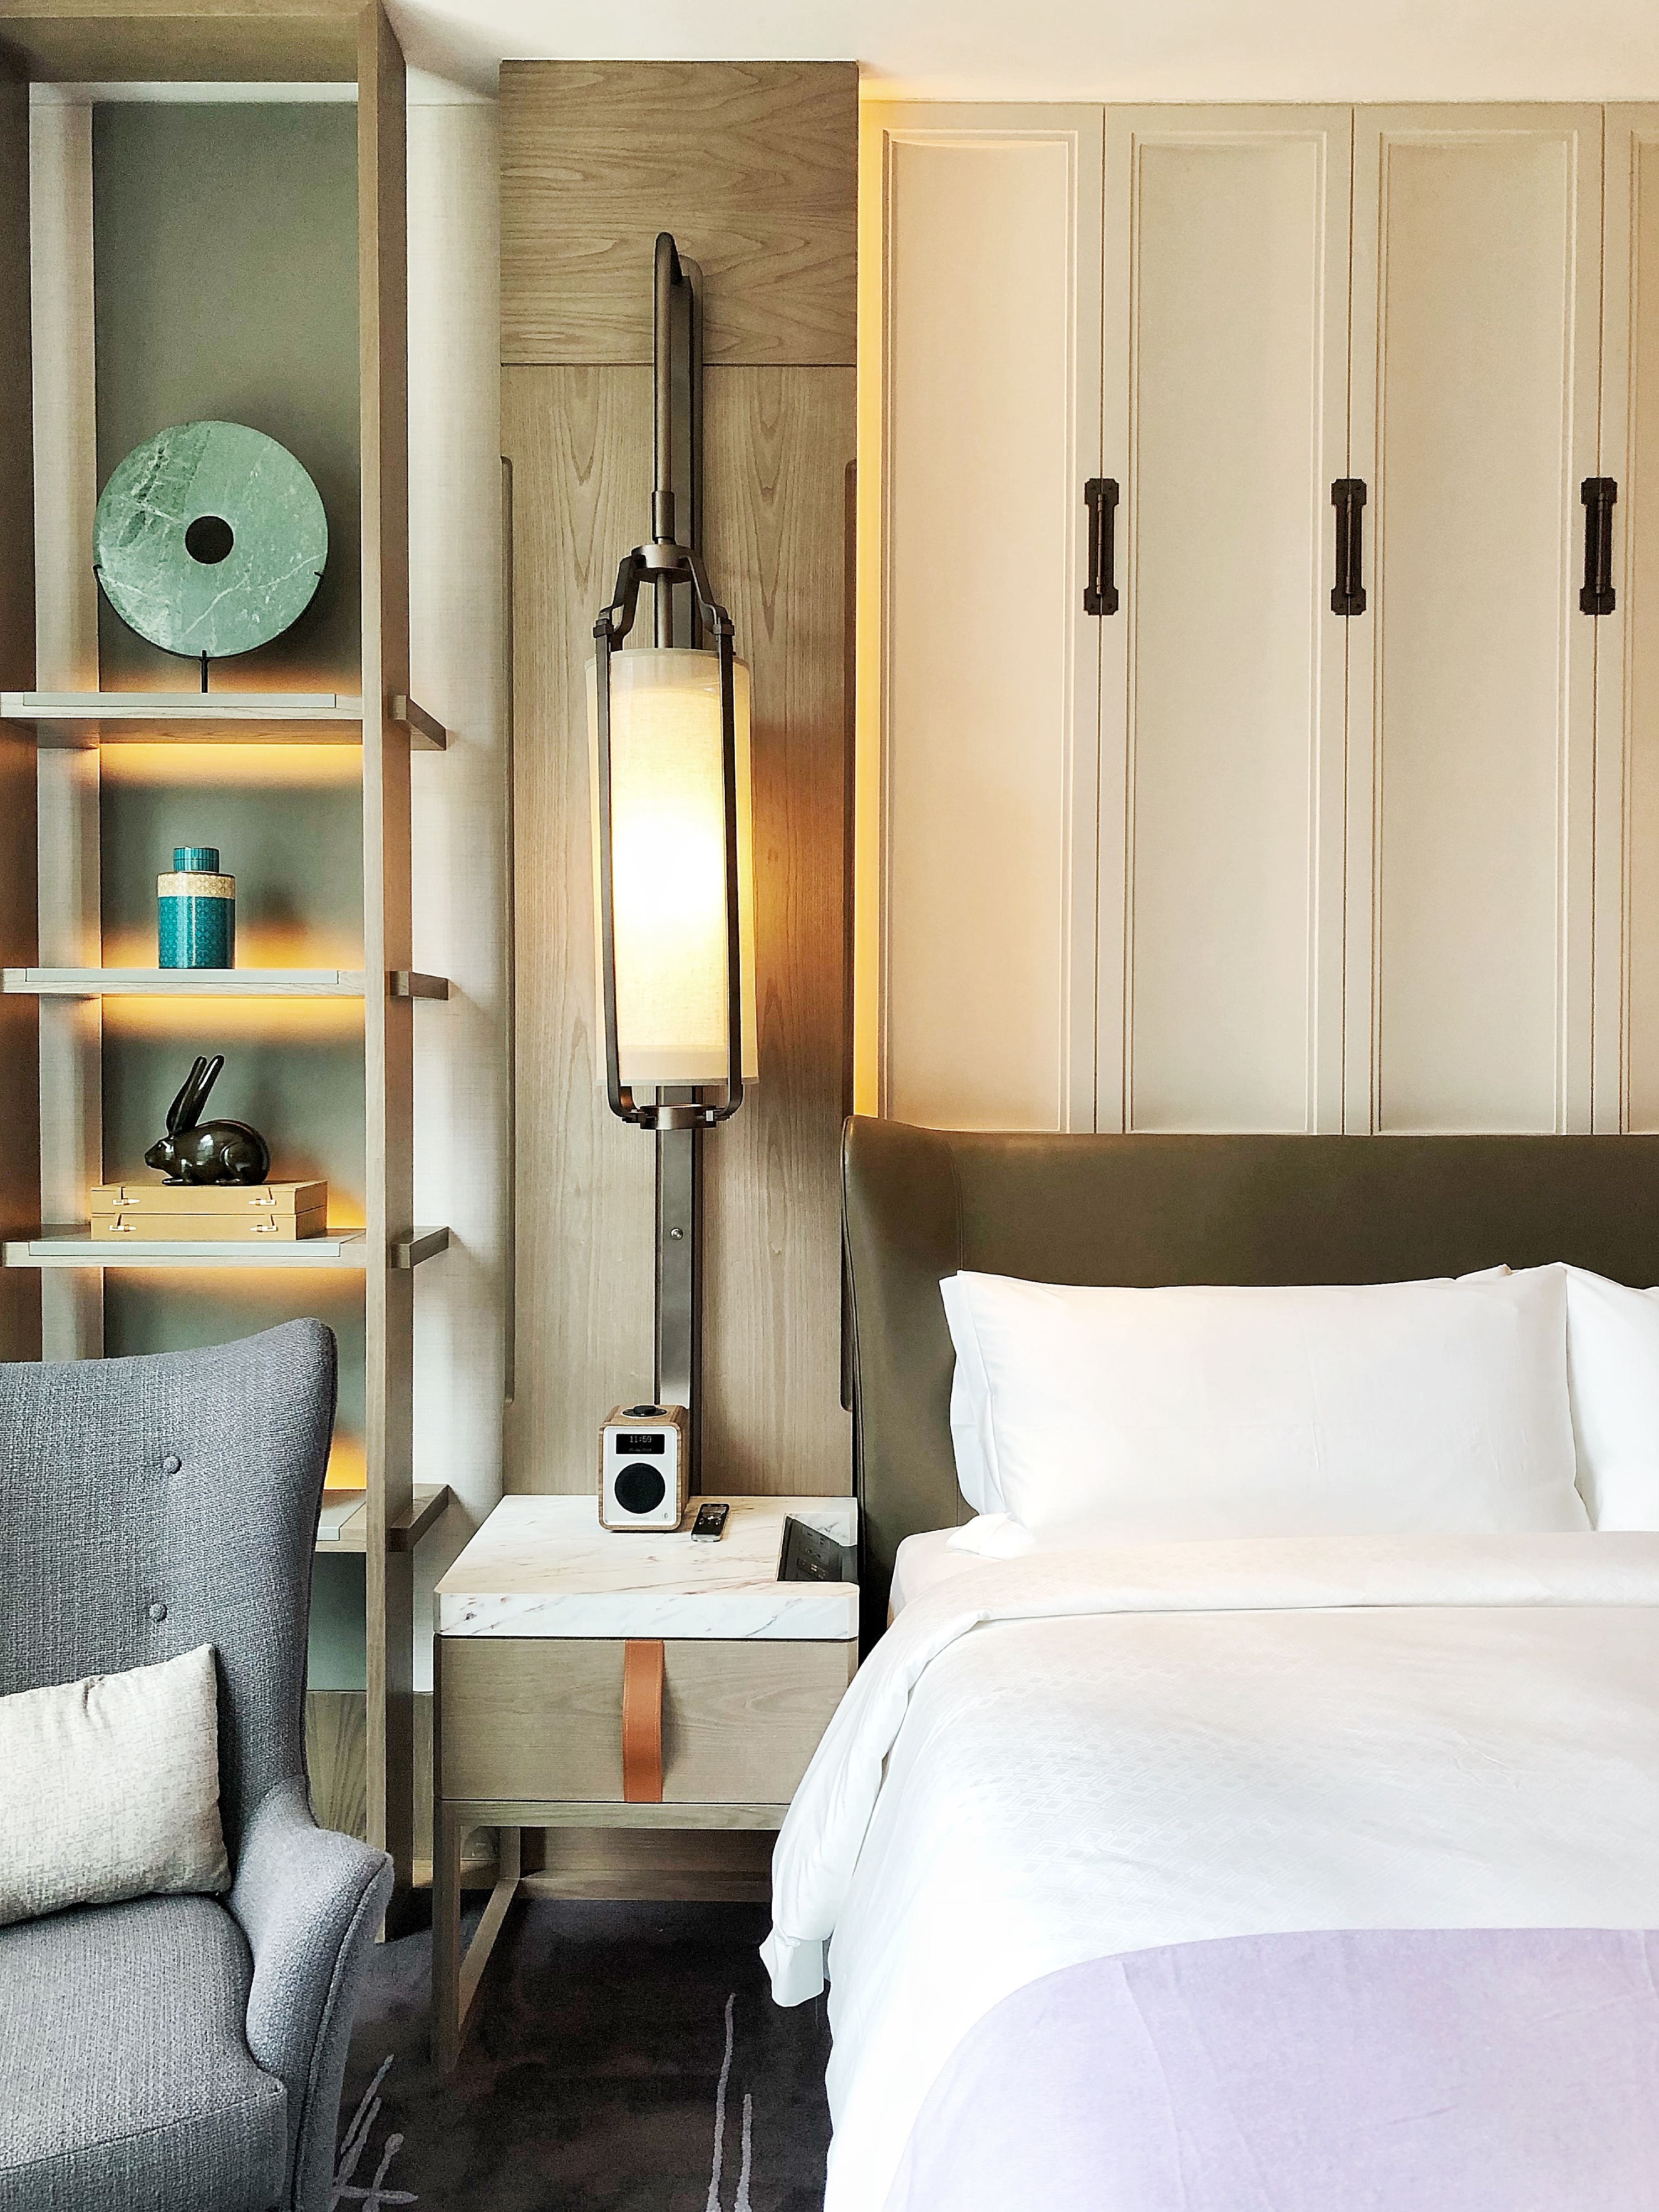 I Design 5-Star Hotels for a Living—Here Are My 5 Bedroom Must-Haves